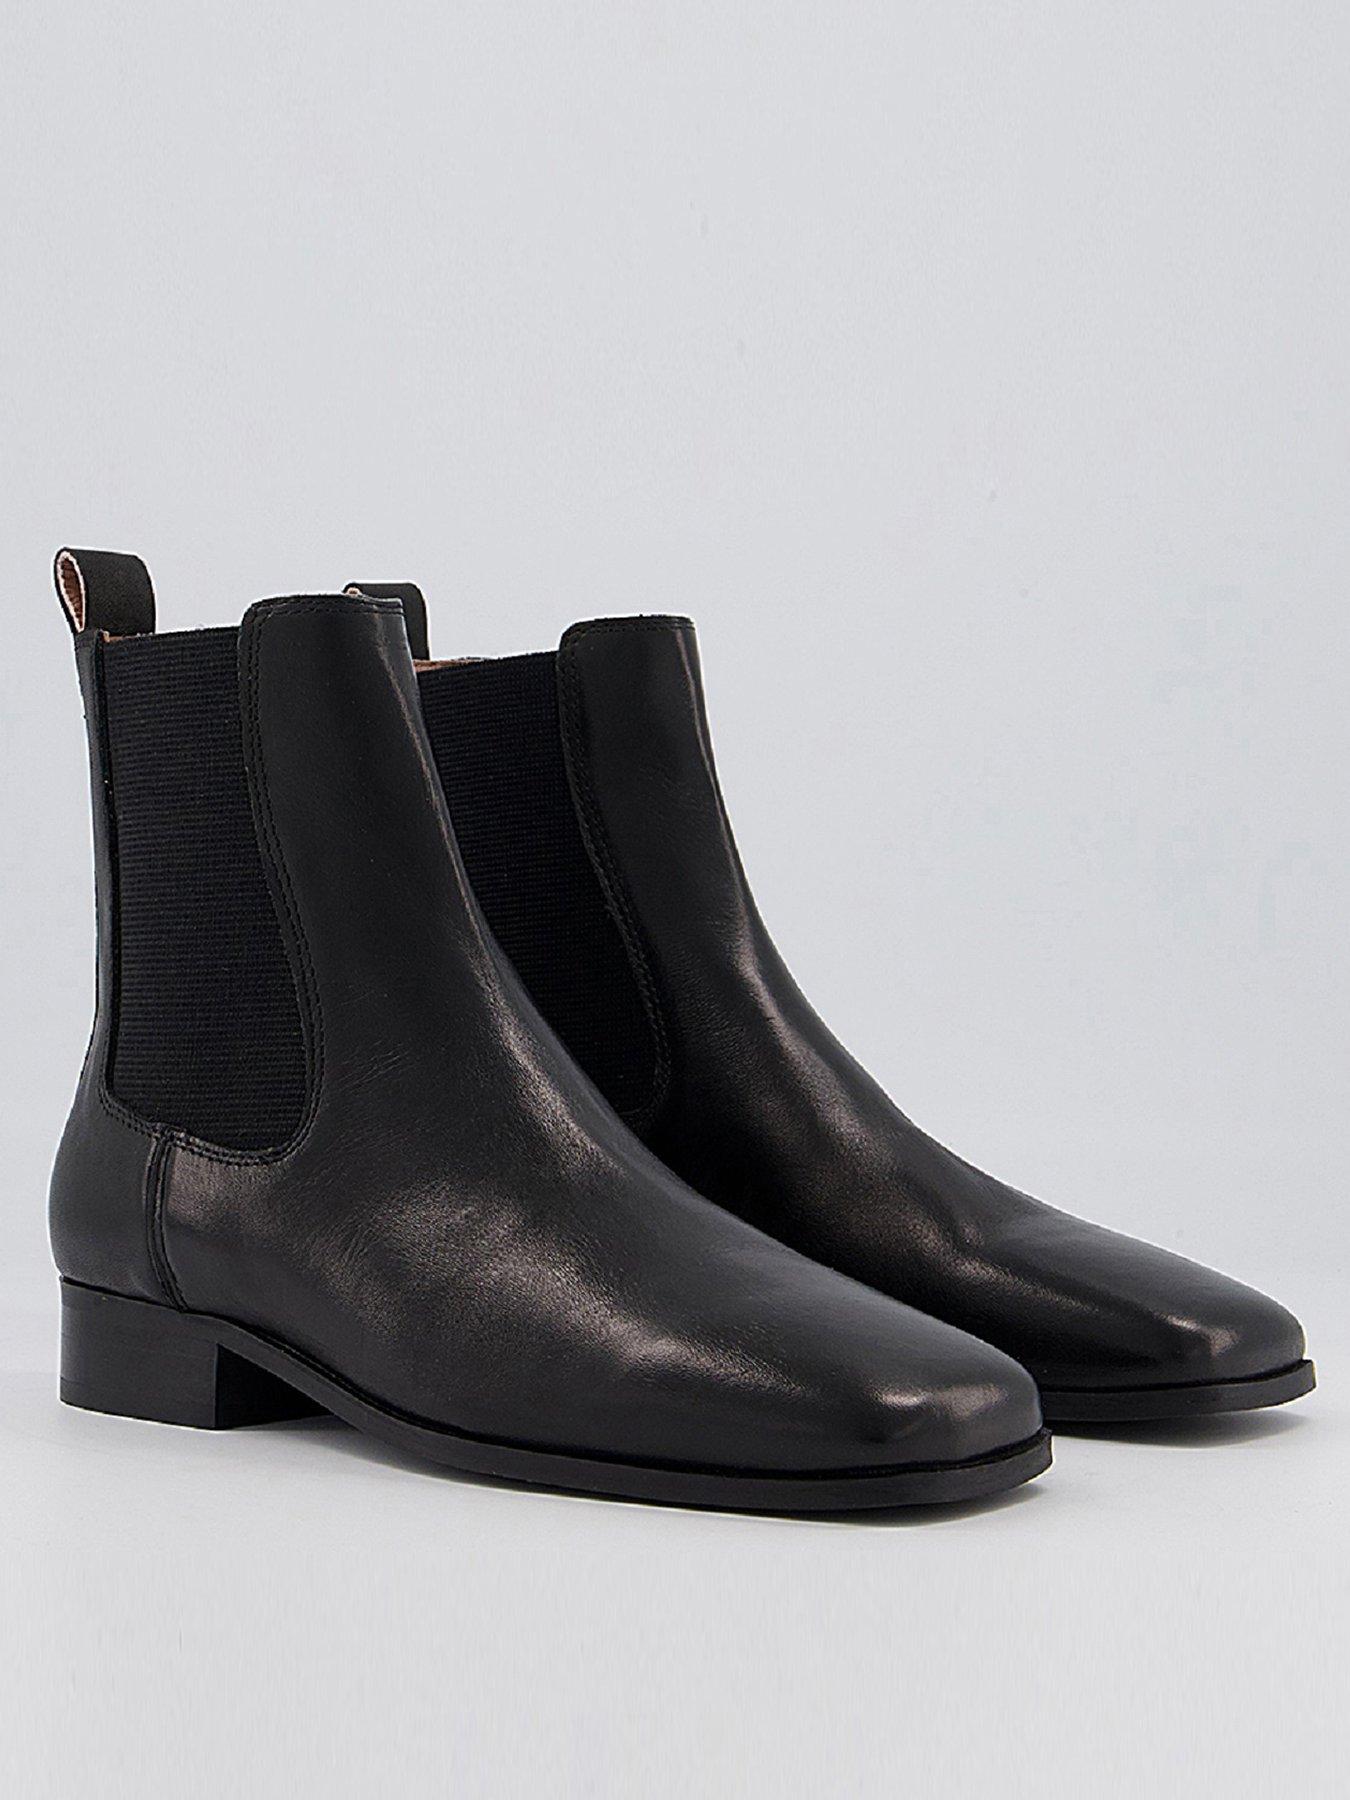 Women Angelina Leather Square Toe Formal Chelsea Boots - Black